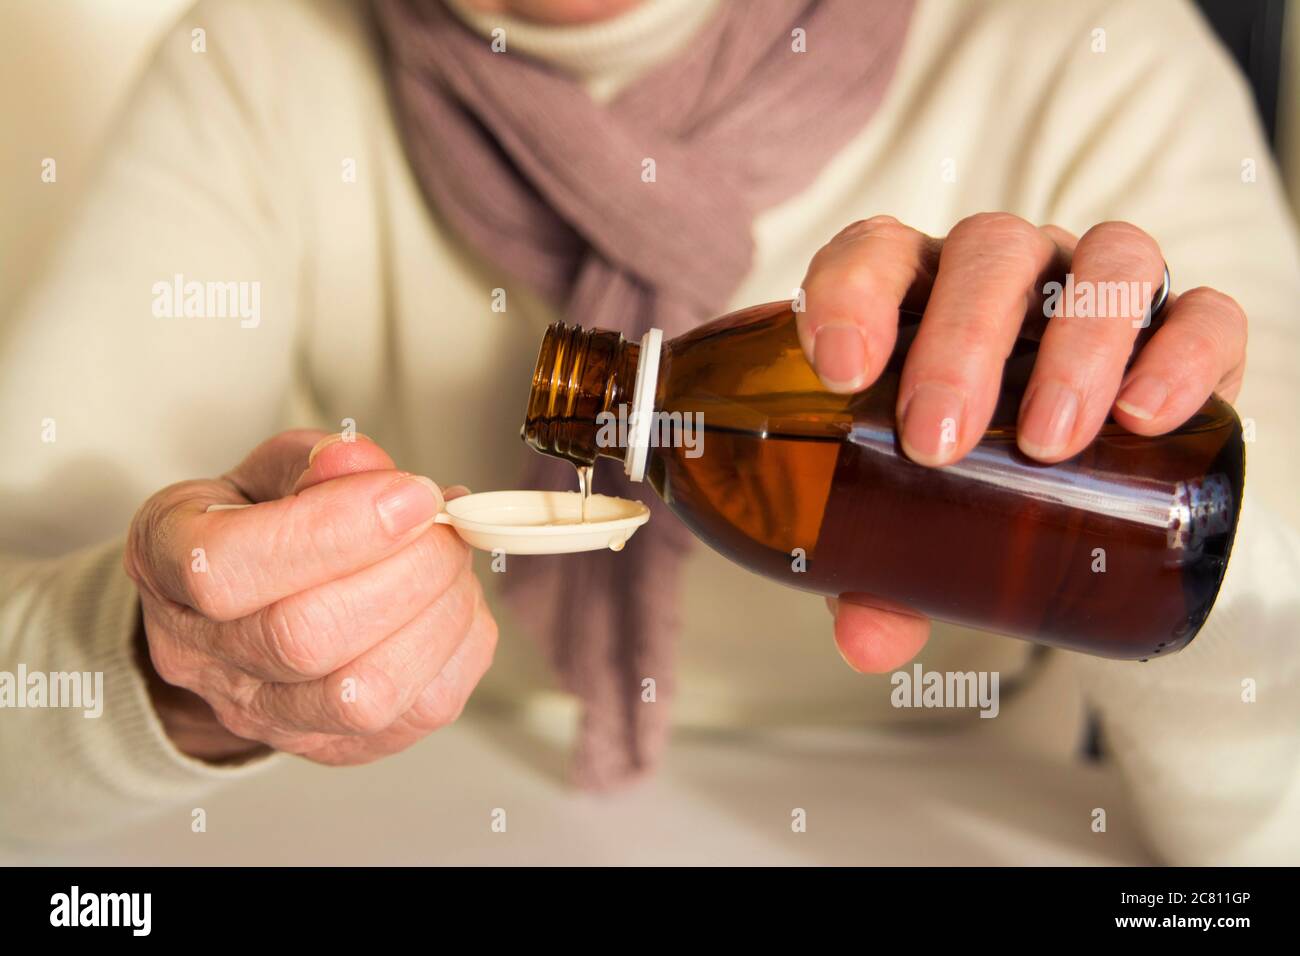 Syrup bottle in the hands of a woman Stock Photo